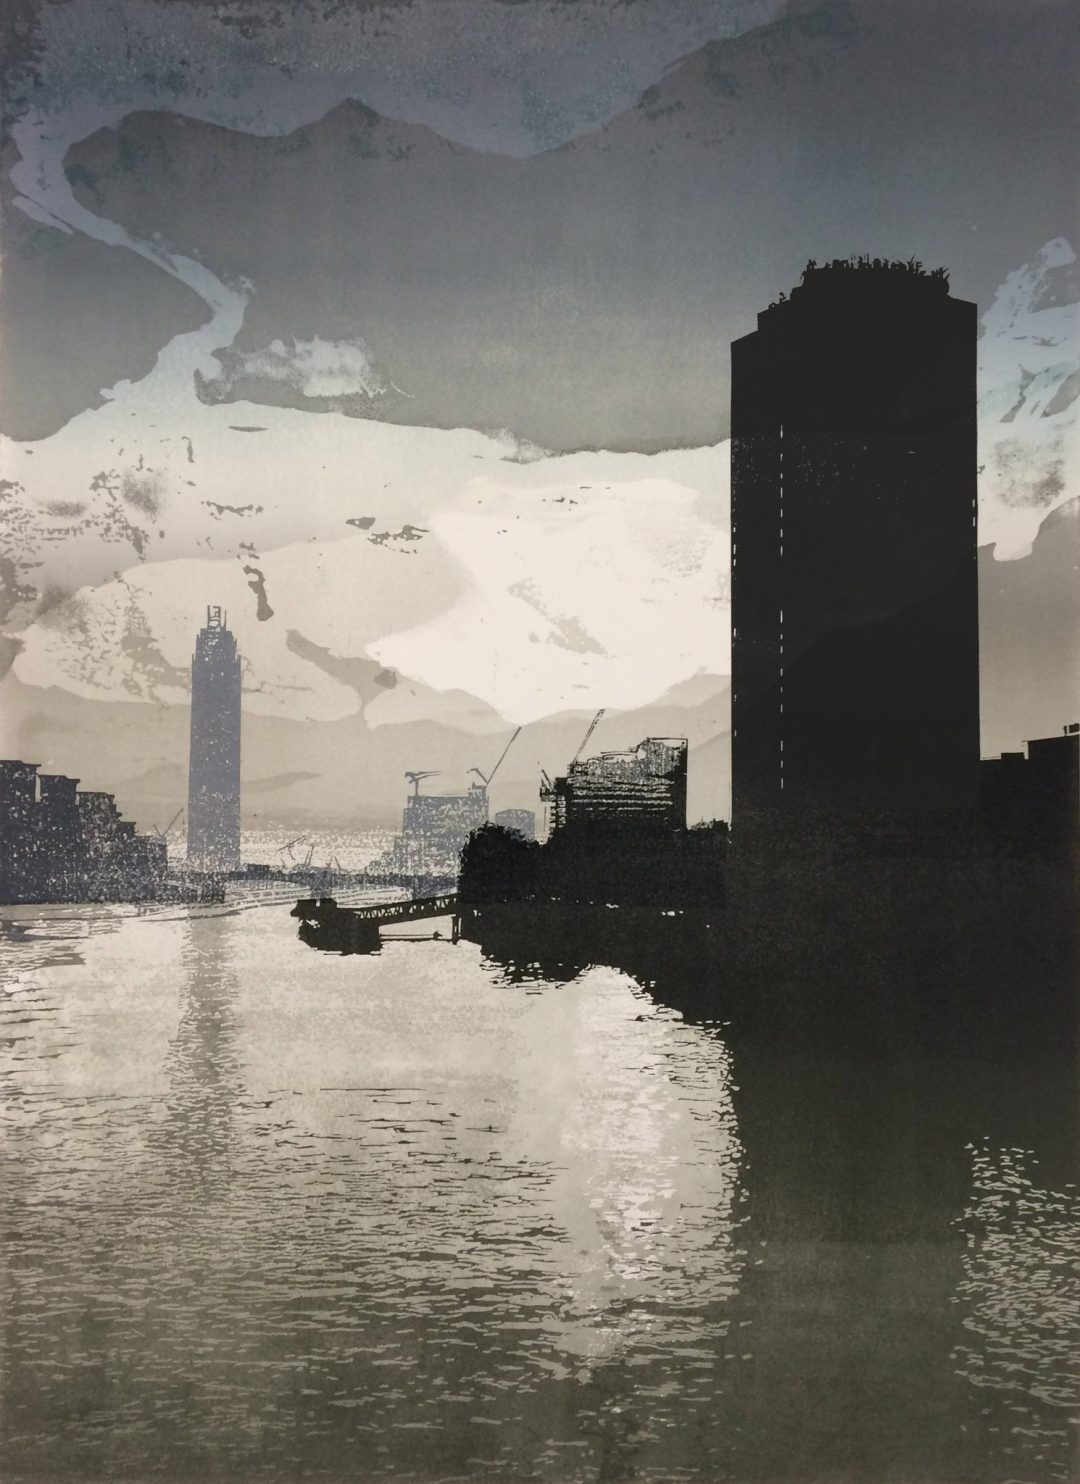 'Lambeth - West' Steve Edwards Etched and Cut Lino, 91 x 70cm, variable edition of 30 (26 available) 'Lambeth - West' was awarded the Jacksons’ Visitor’s Choice Award at the National Original Print Exhibition 2017